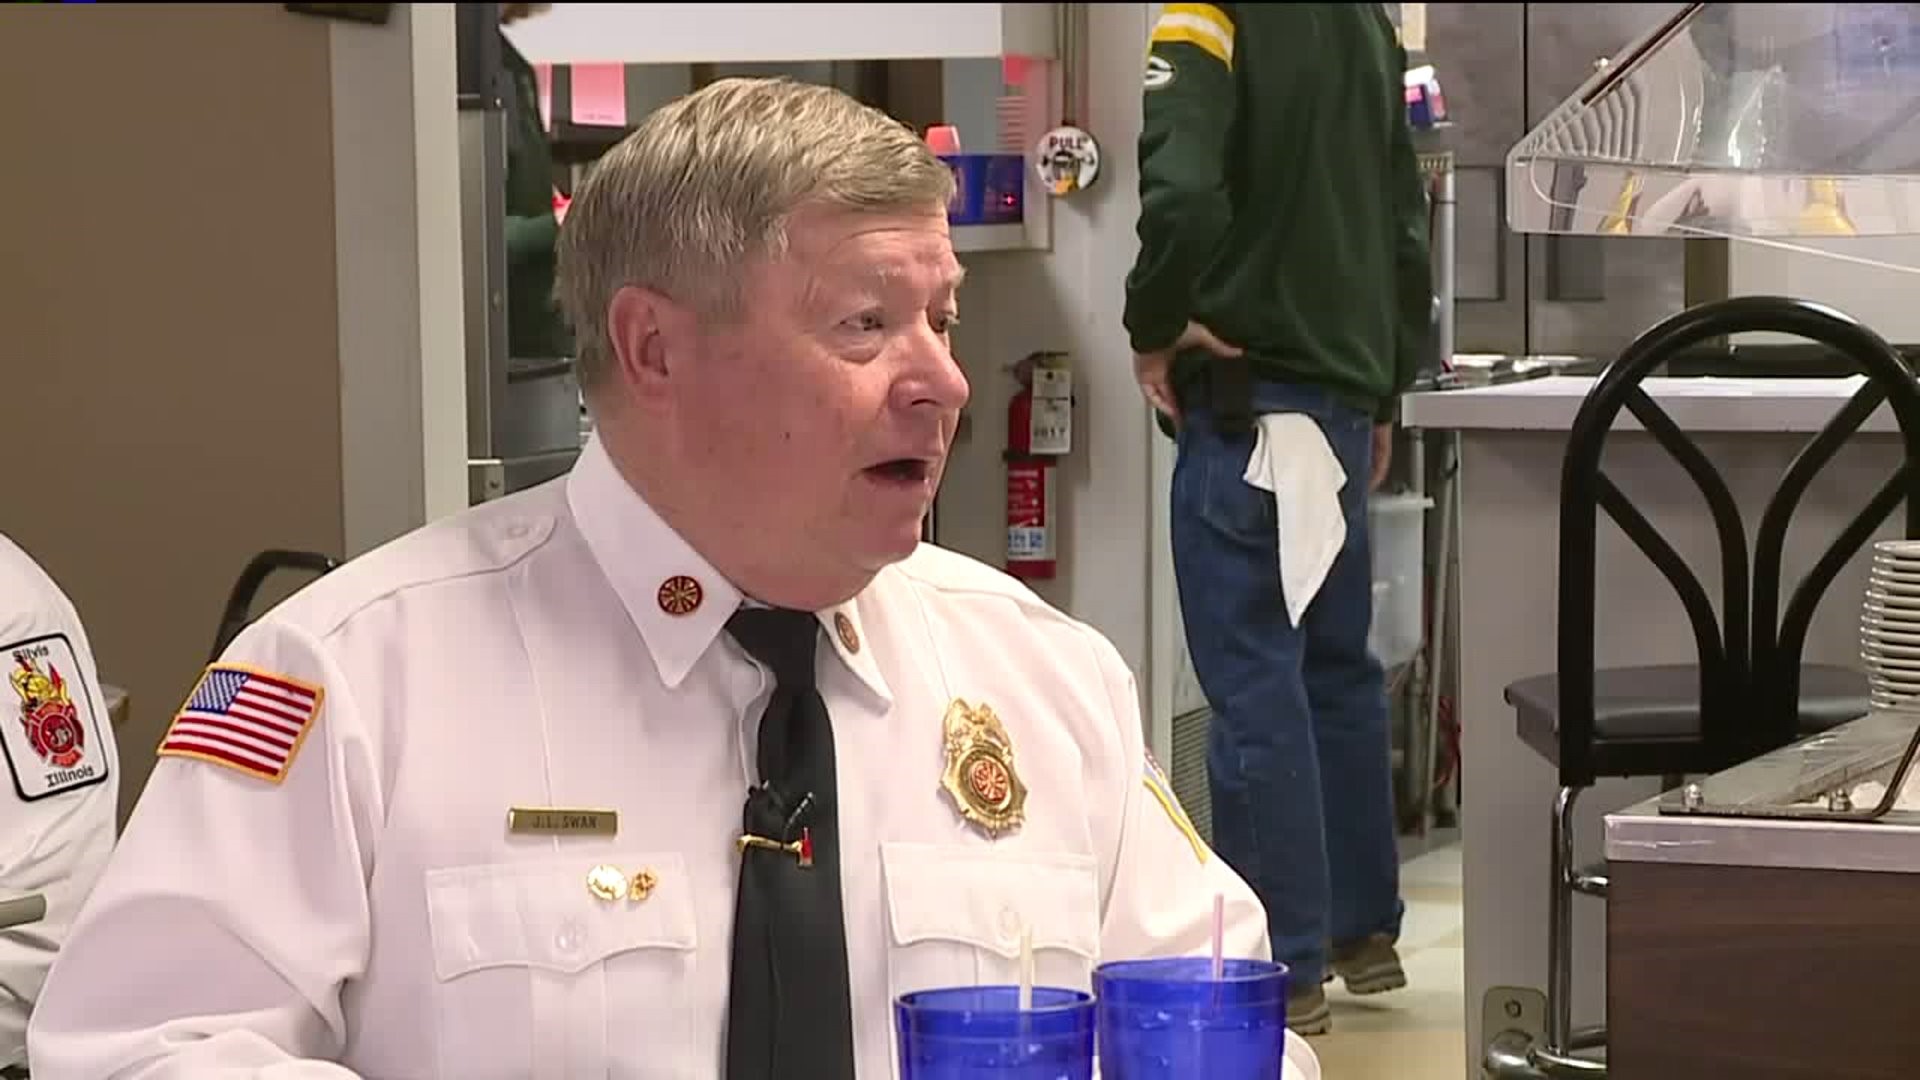 Colona fire chief talks recruiting firefighters